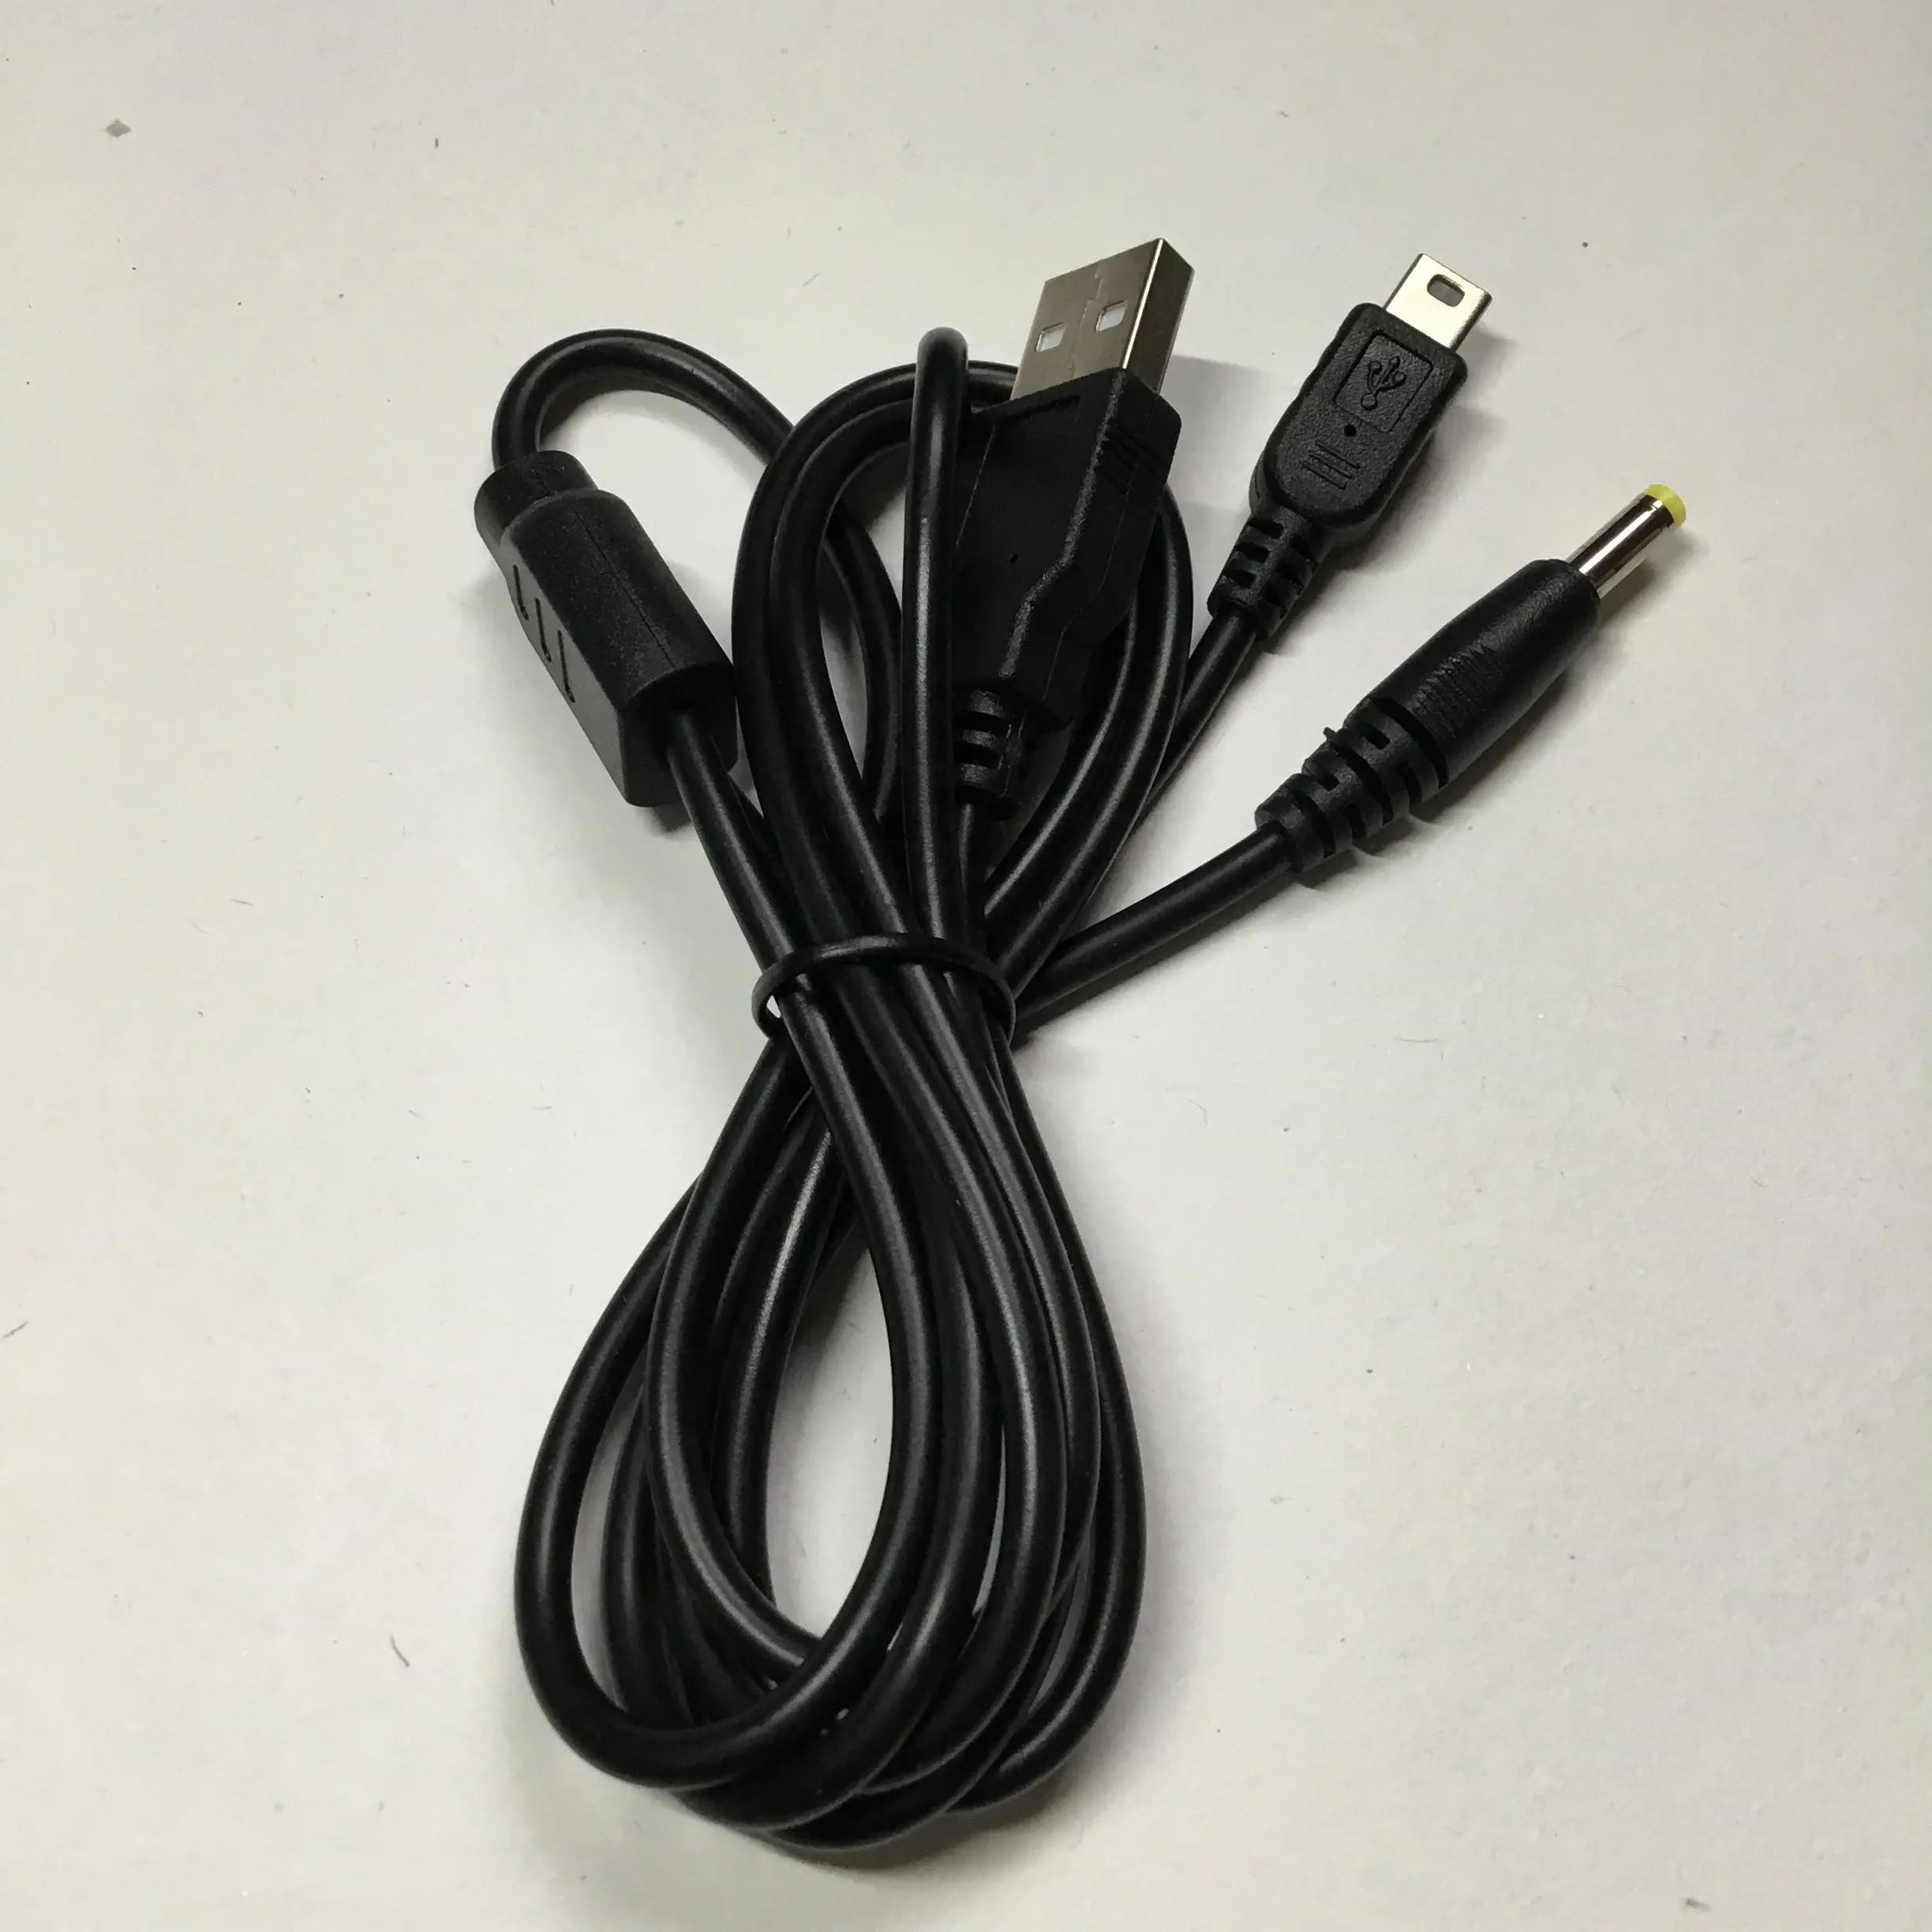 2 in 1 대 한 PSP USB Cable 충전기 Charging Cable 대 한 PSP 1000 2000 3000 mb/Cable 납 Cord 1.2 m